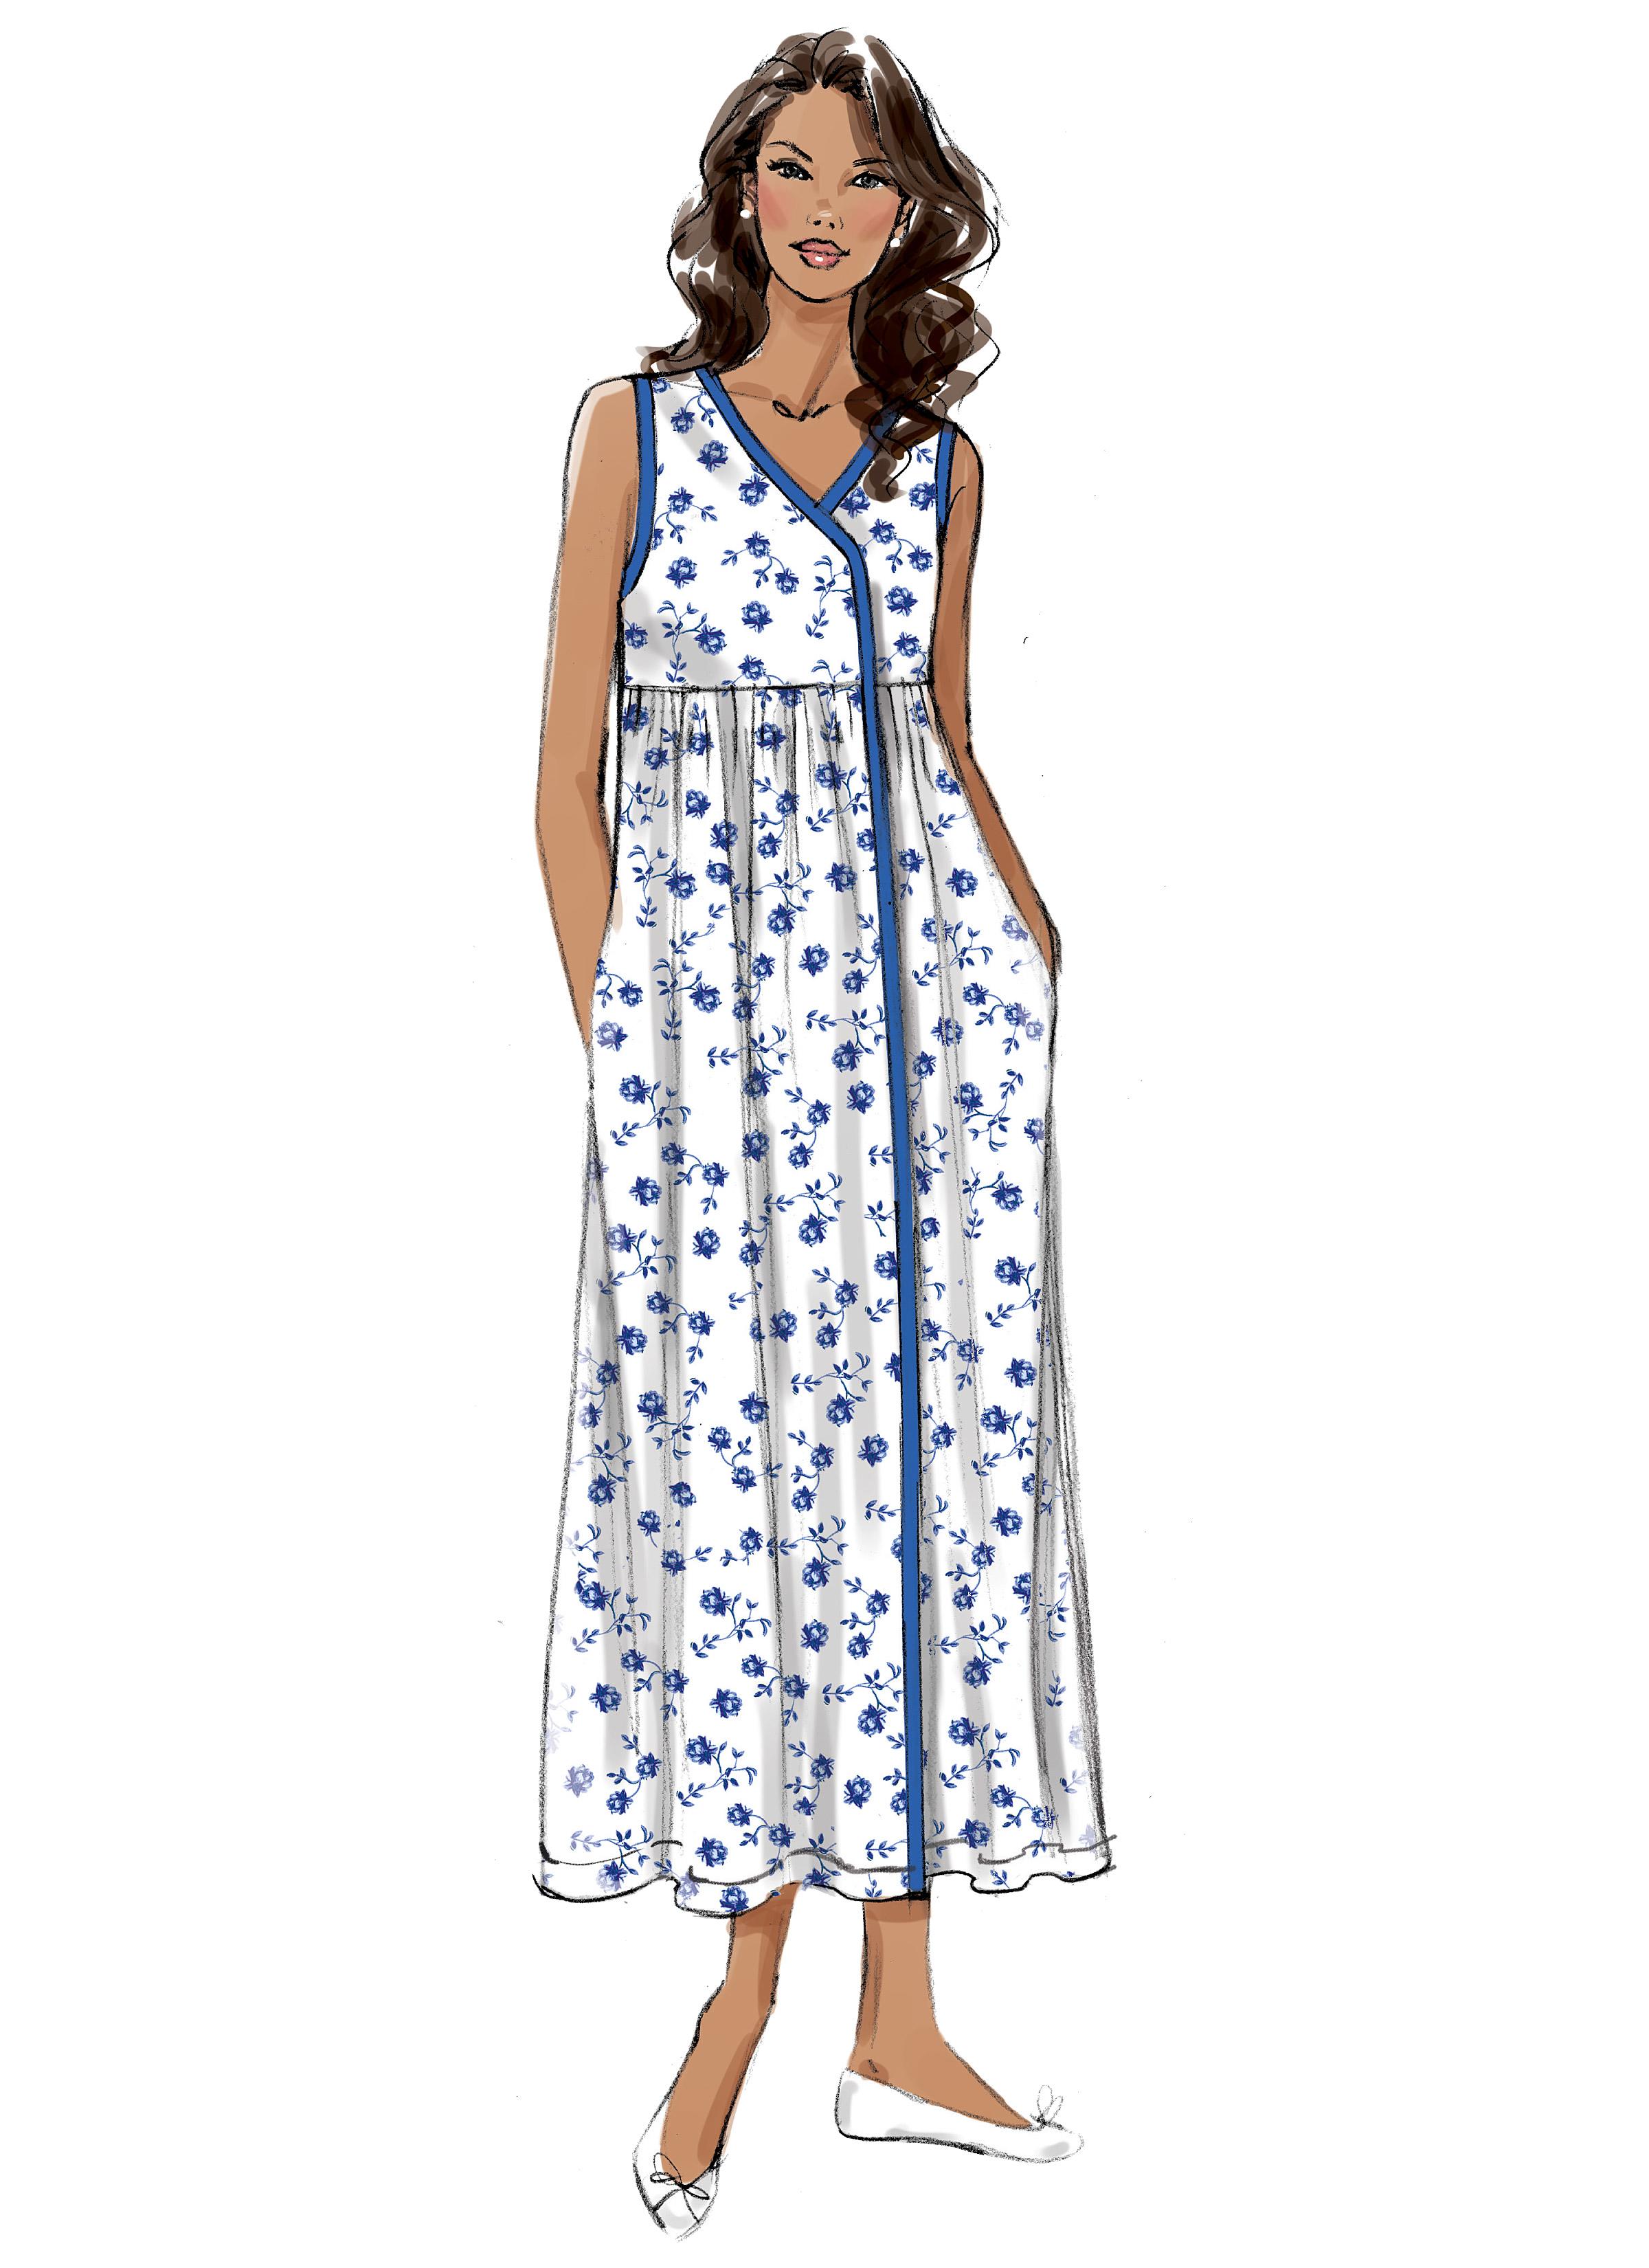 Butterick B6300 Misses'/Women's Robe, Belt and Negligee